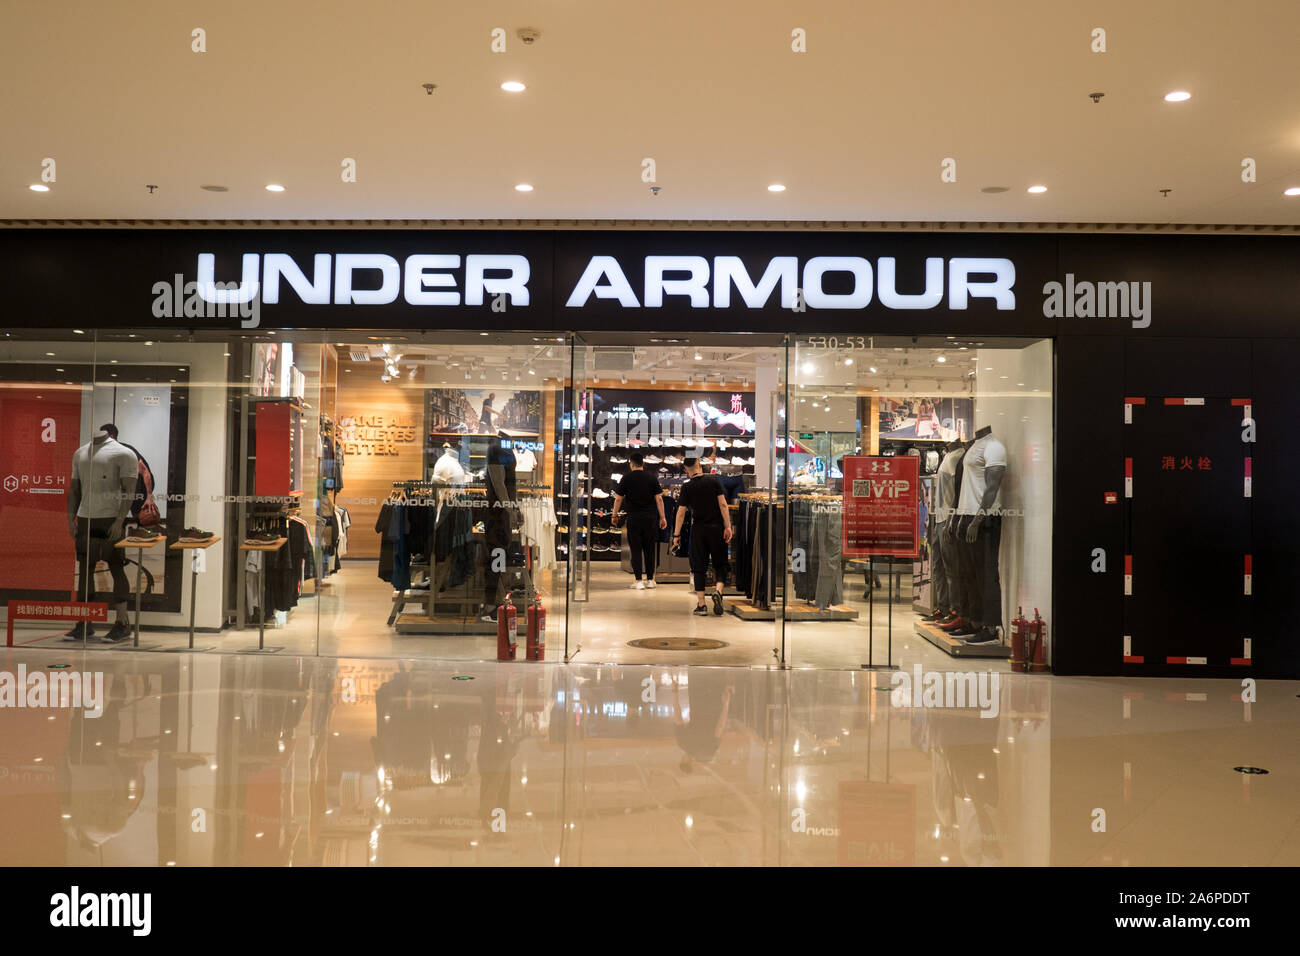 Mar victoria dictador UNDER ARMOUR in China: Shop facade during a special sale, This Famous  American brand makes luxury fitness sports clothing, China 17 june 2019  Stock Photo - Alamy